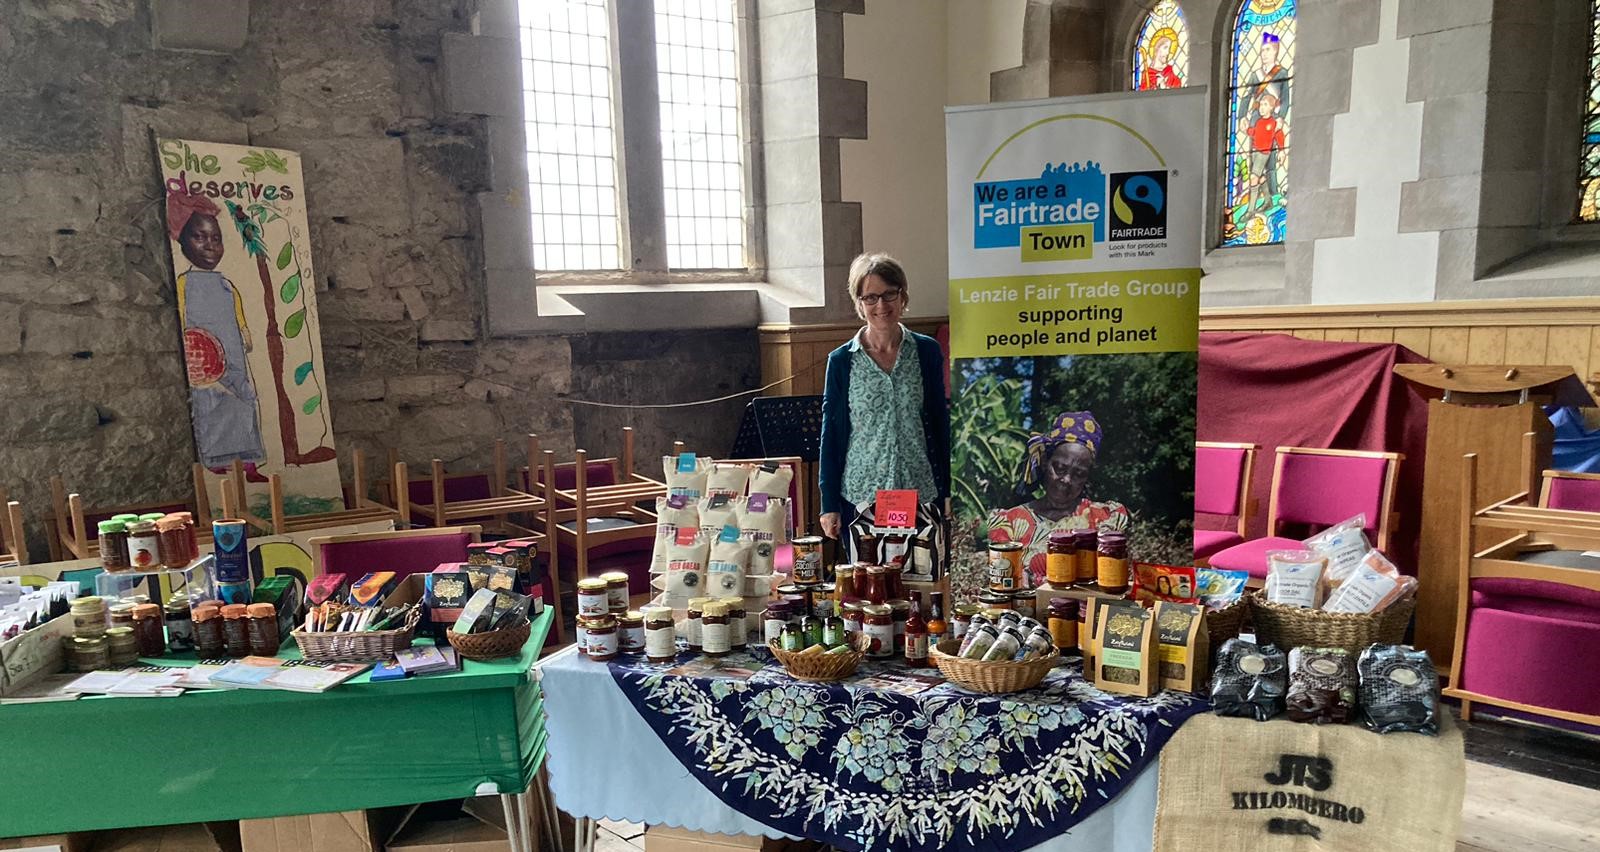 a well stocked Fairtrade stall